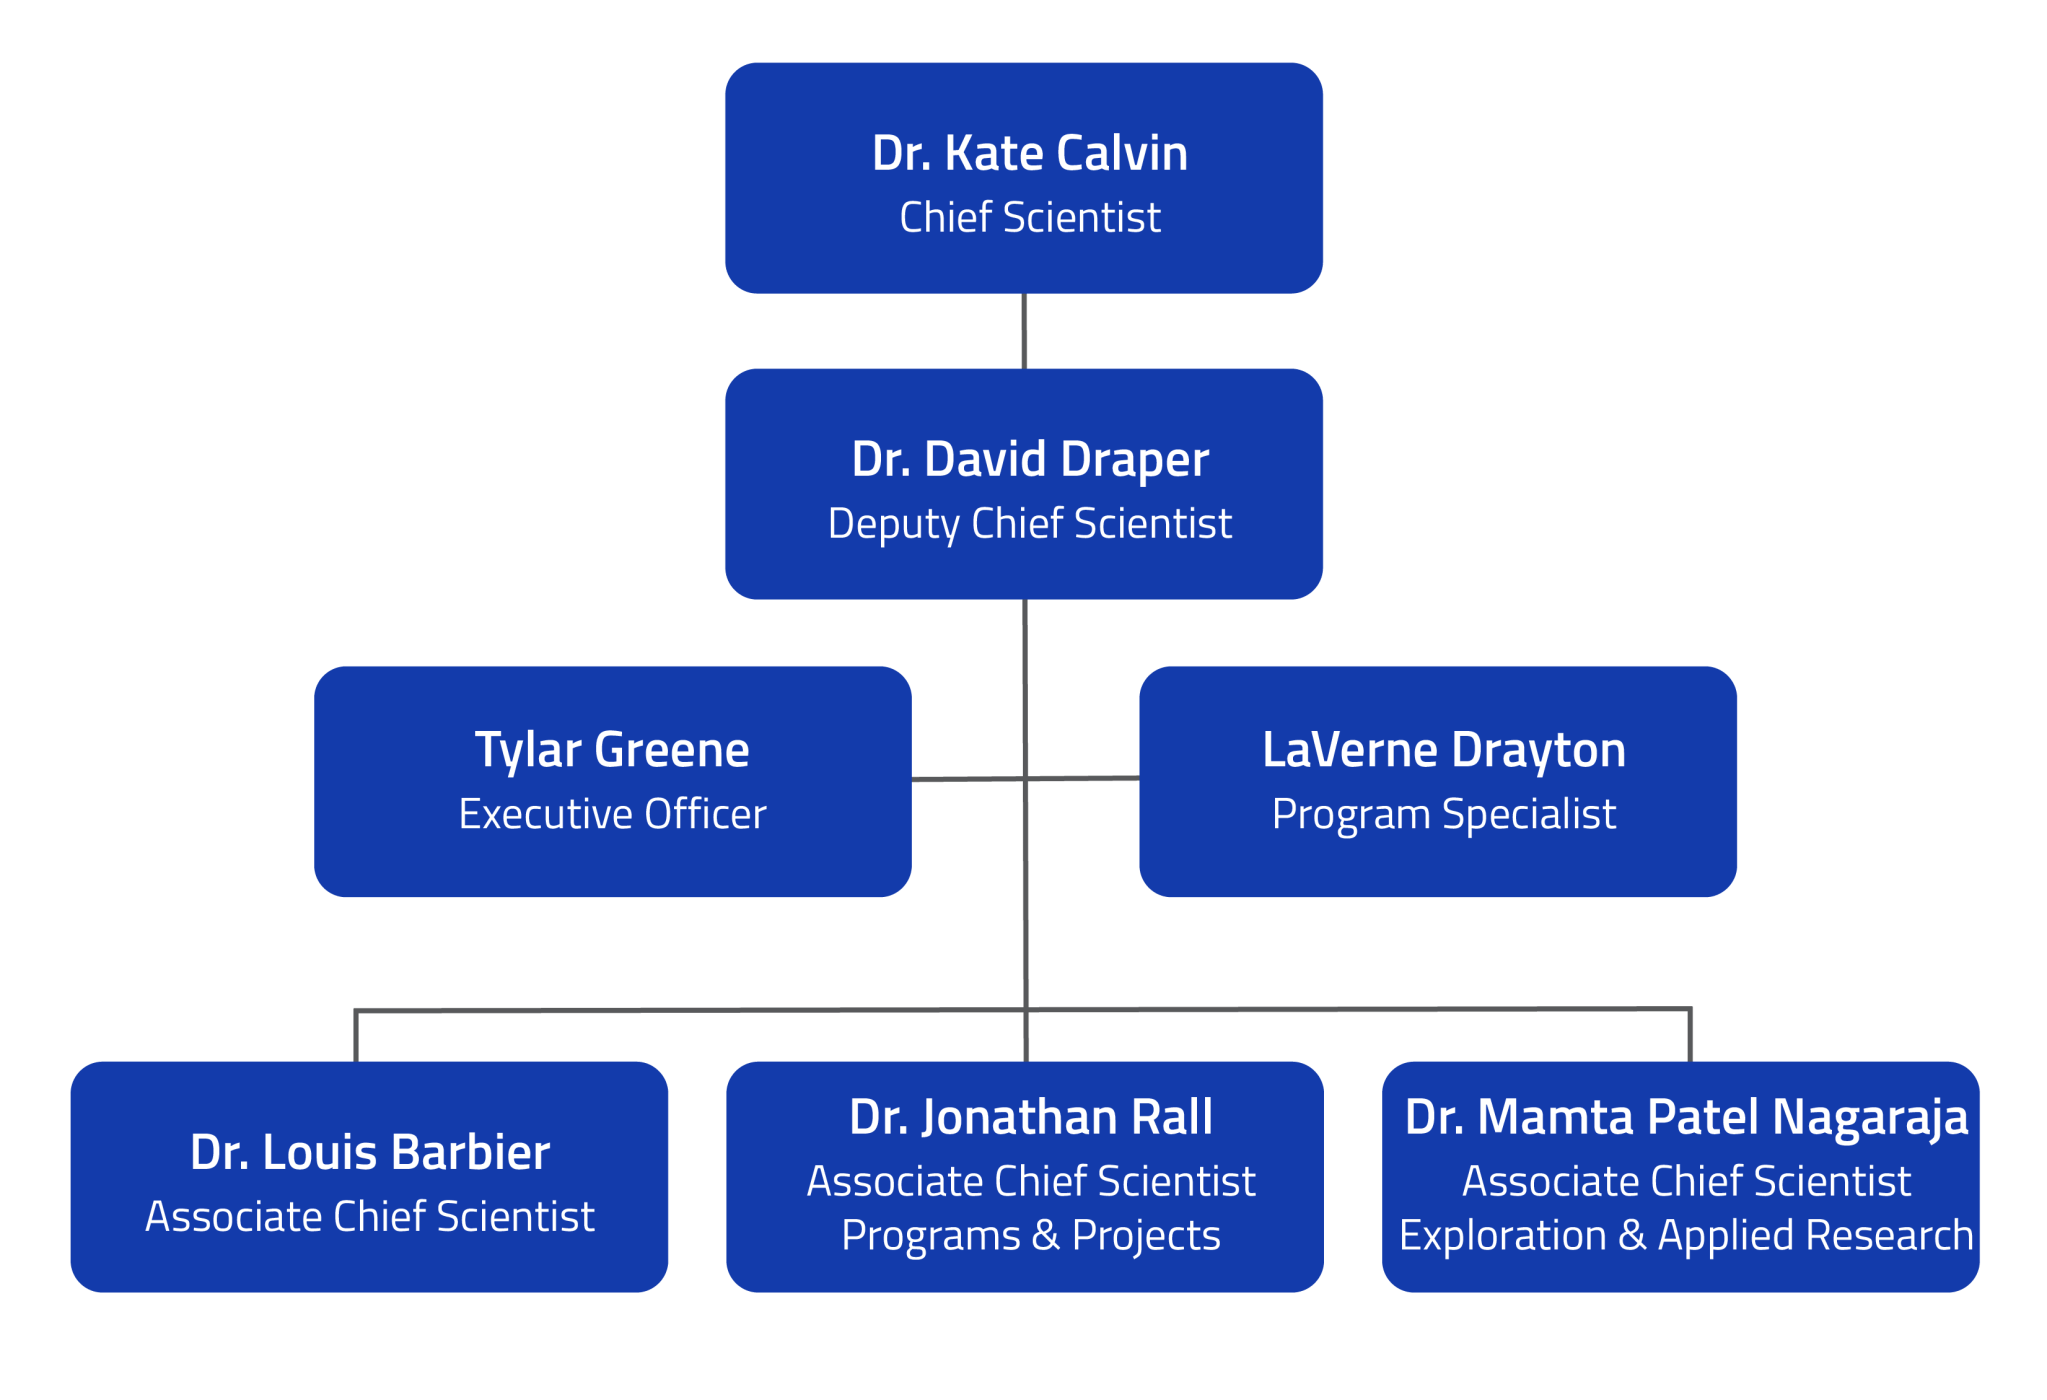 Organization chart Showing the names and titles from the bios above